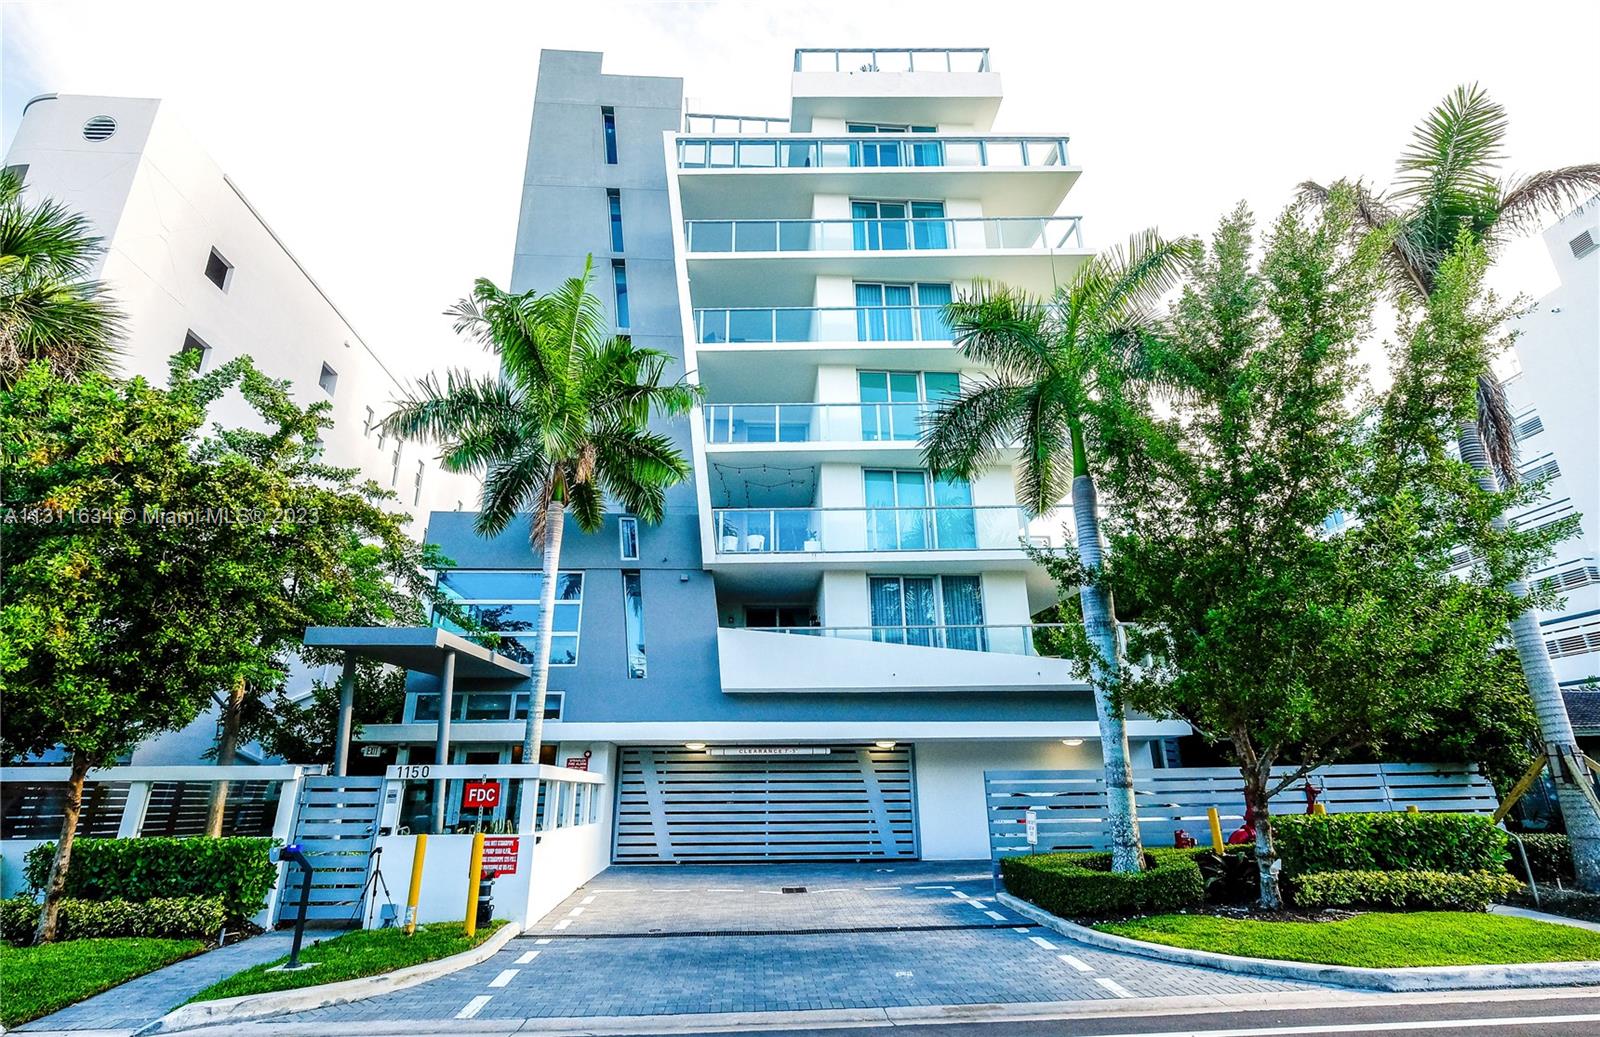 Professionally decorated 3 bed 2 bath unit with oversized balcony. This boutique building with refined finishes has only 17 residences, rooftop pool, electronic concierge, The unit features automated door locks and blinds, high impact windows & doors. Home to a K-8 school (an "A" school for 16 consecutive years!). This boutique building is in the heart of exclusive Bay Harbor Islands, a few minutes from the beach, restaurants and the prestigious Bal Harbour Mall. Quick approval & easy to show! Minimum 6 months.